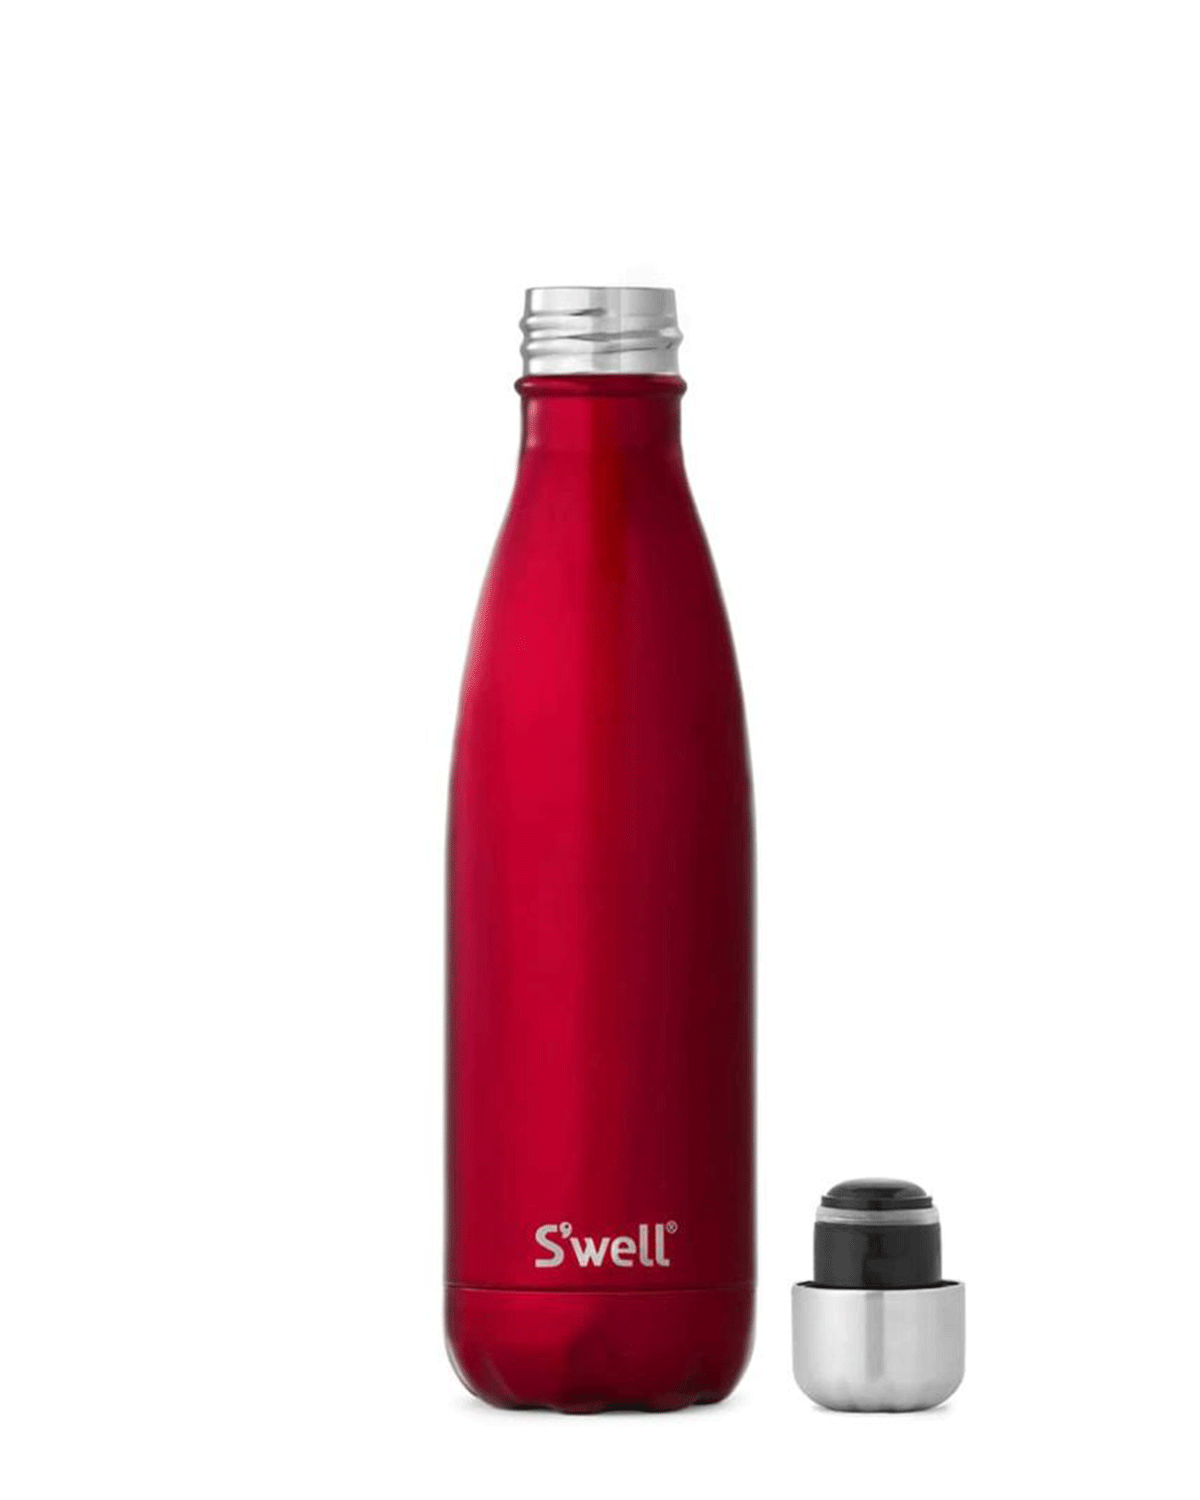 S'well Rowboat Red 25 oz Bottle